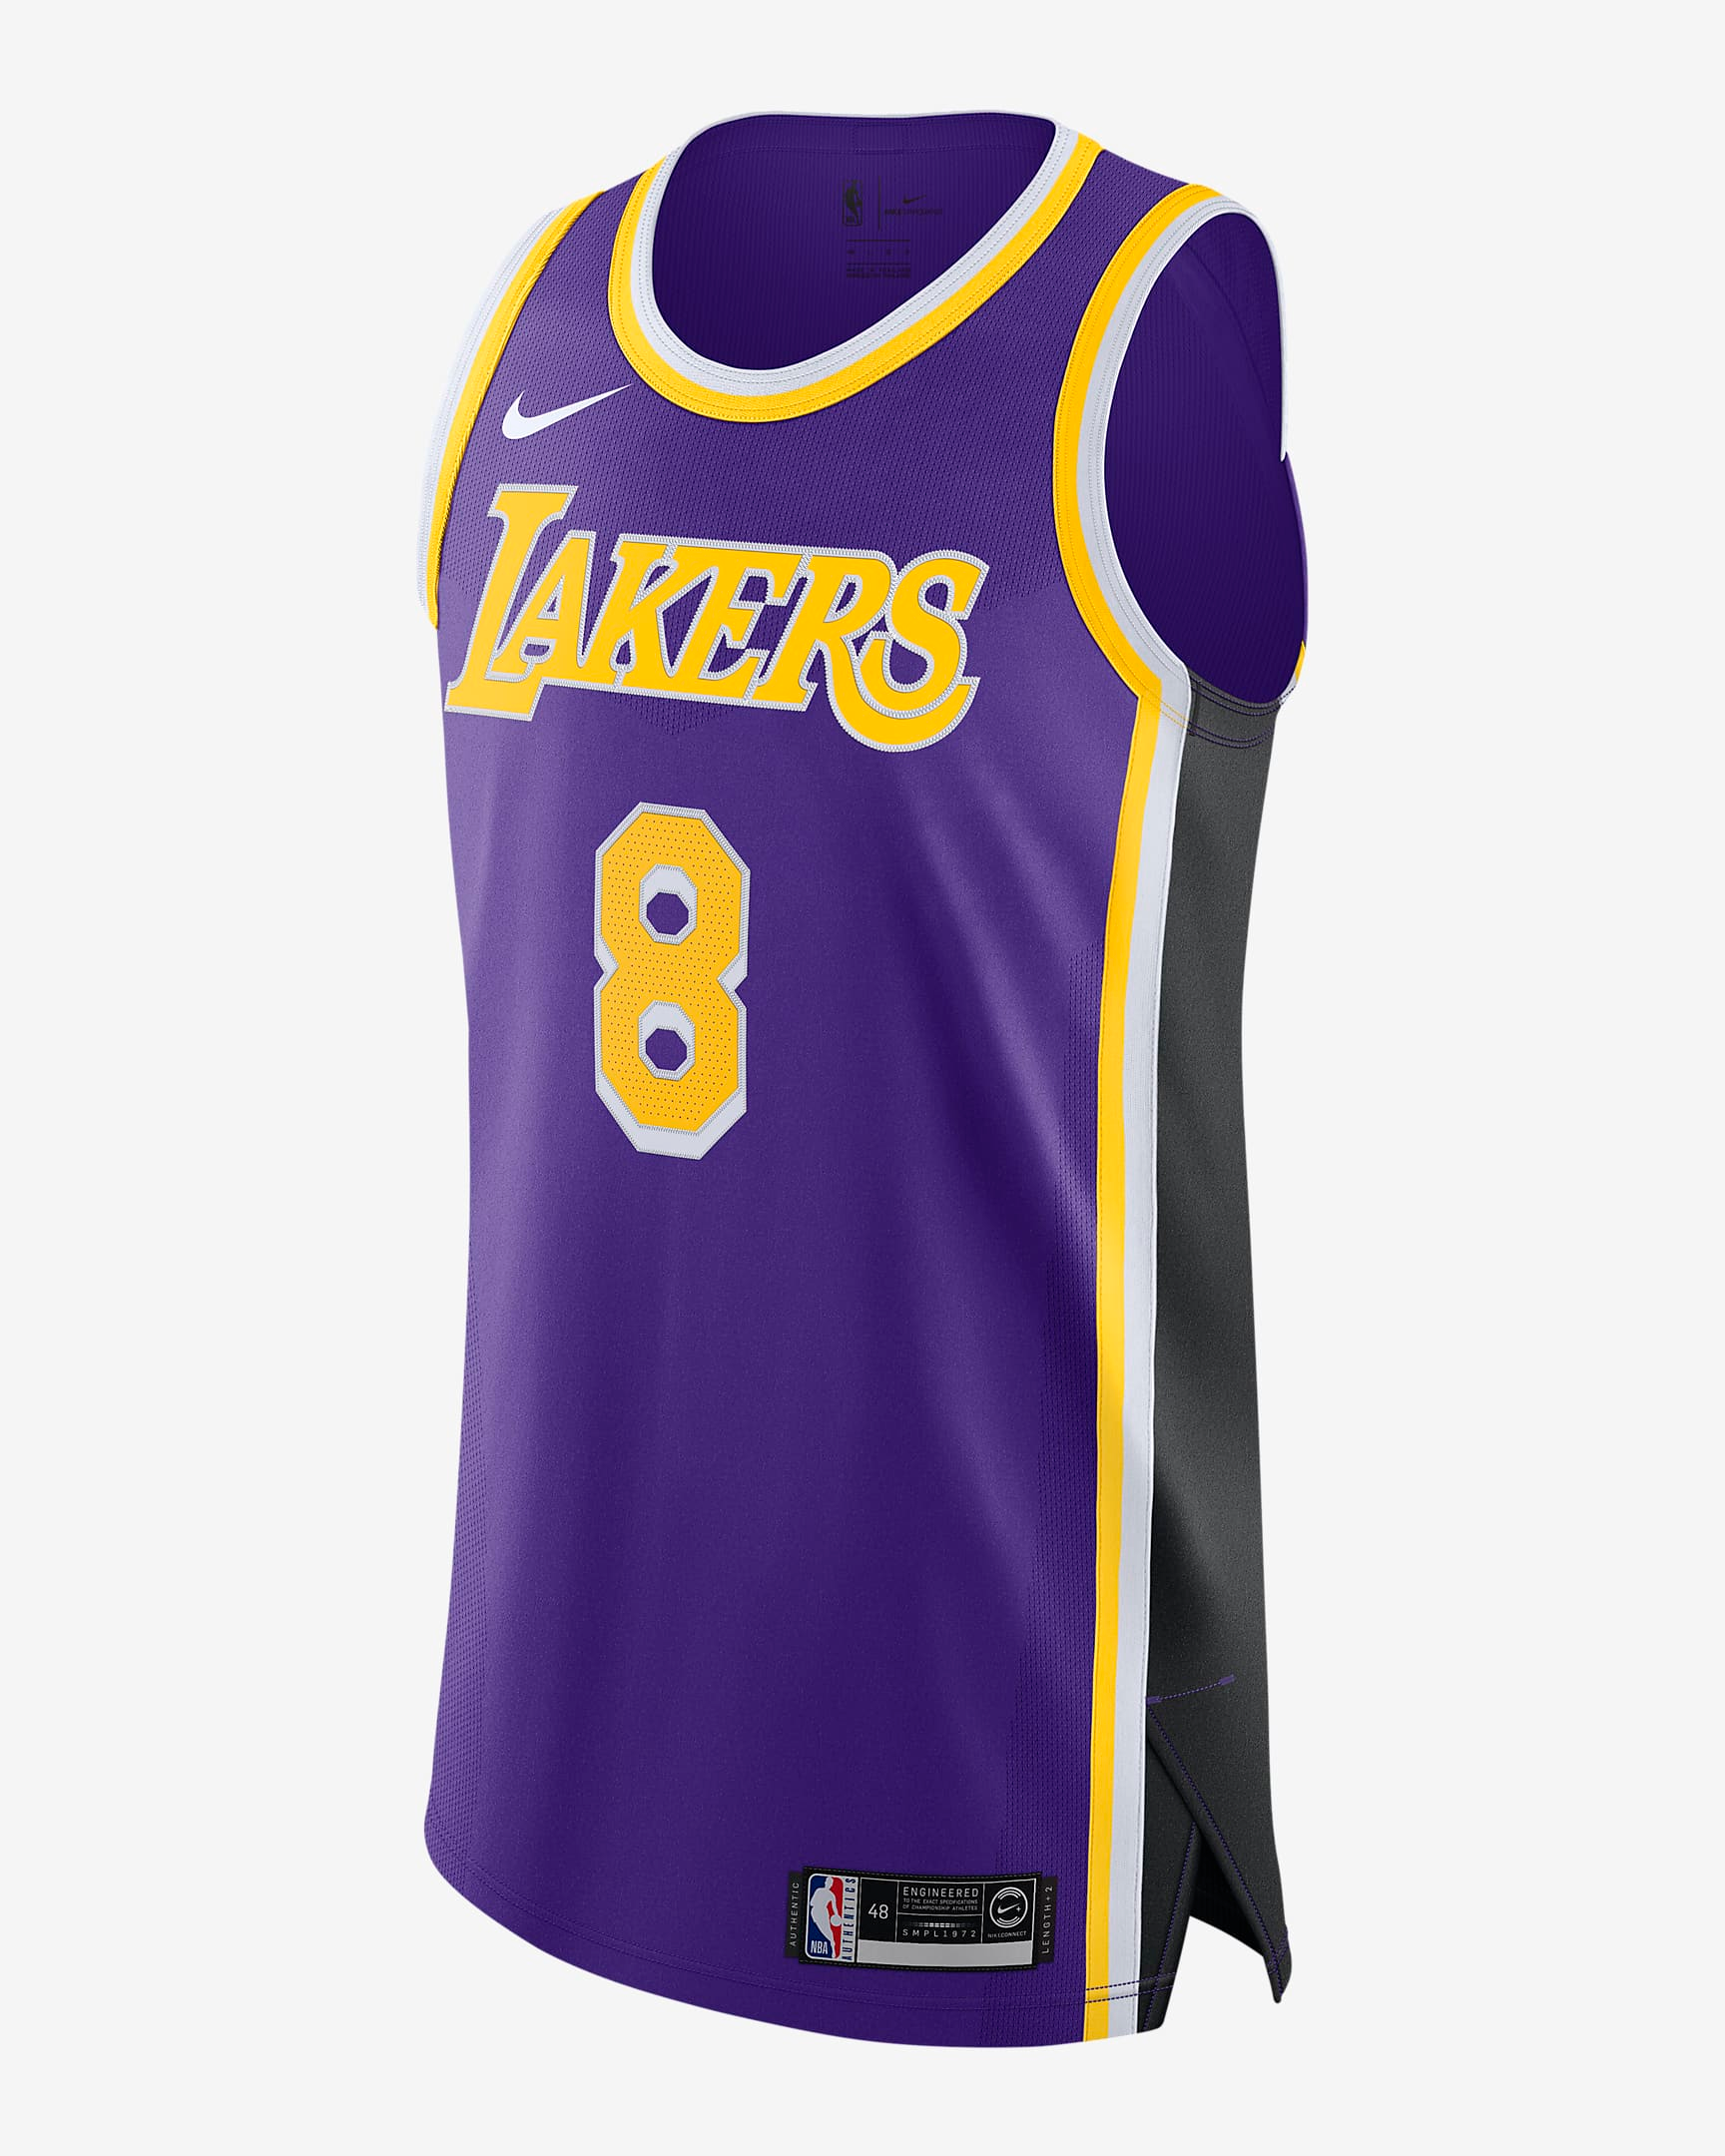 los-angeles-lakers-statement-edition-nba-authentic-jersey-P4mnp9.png